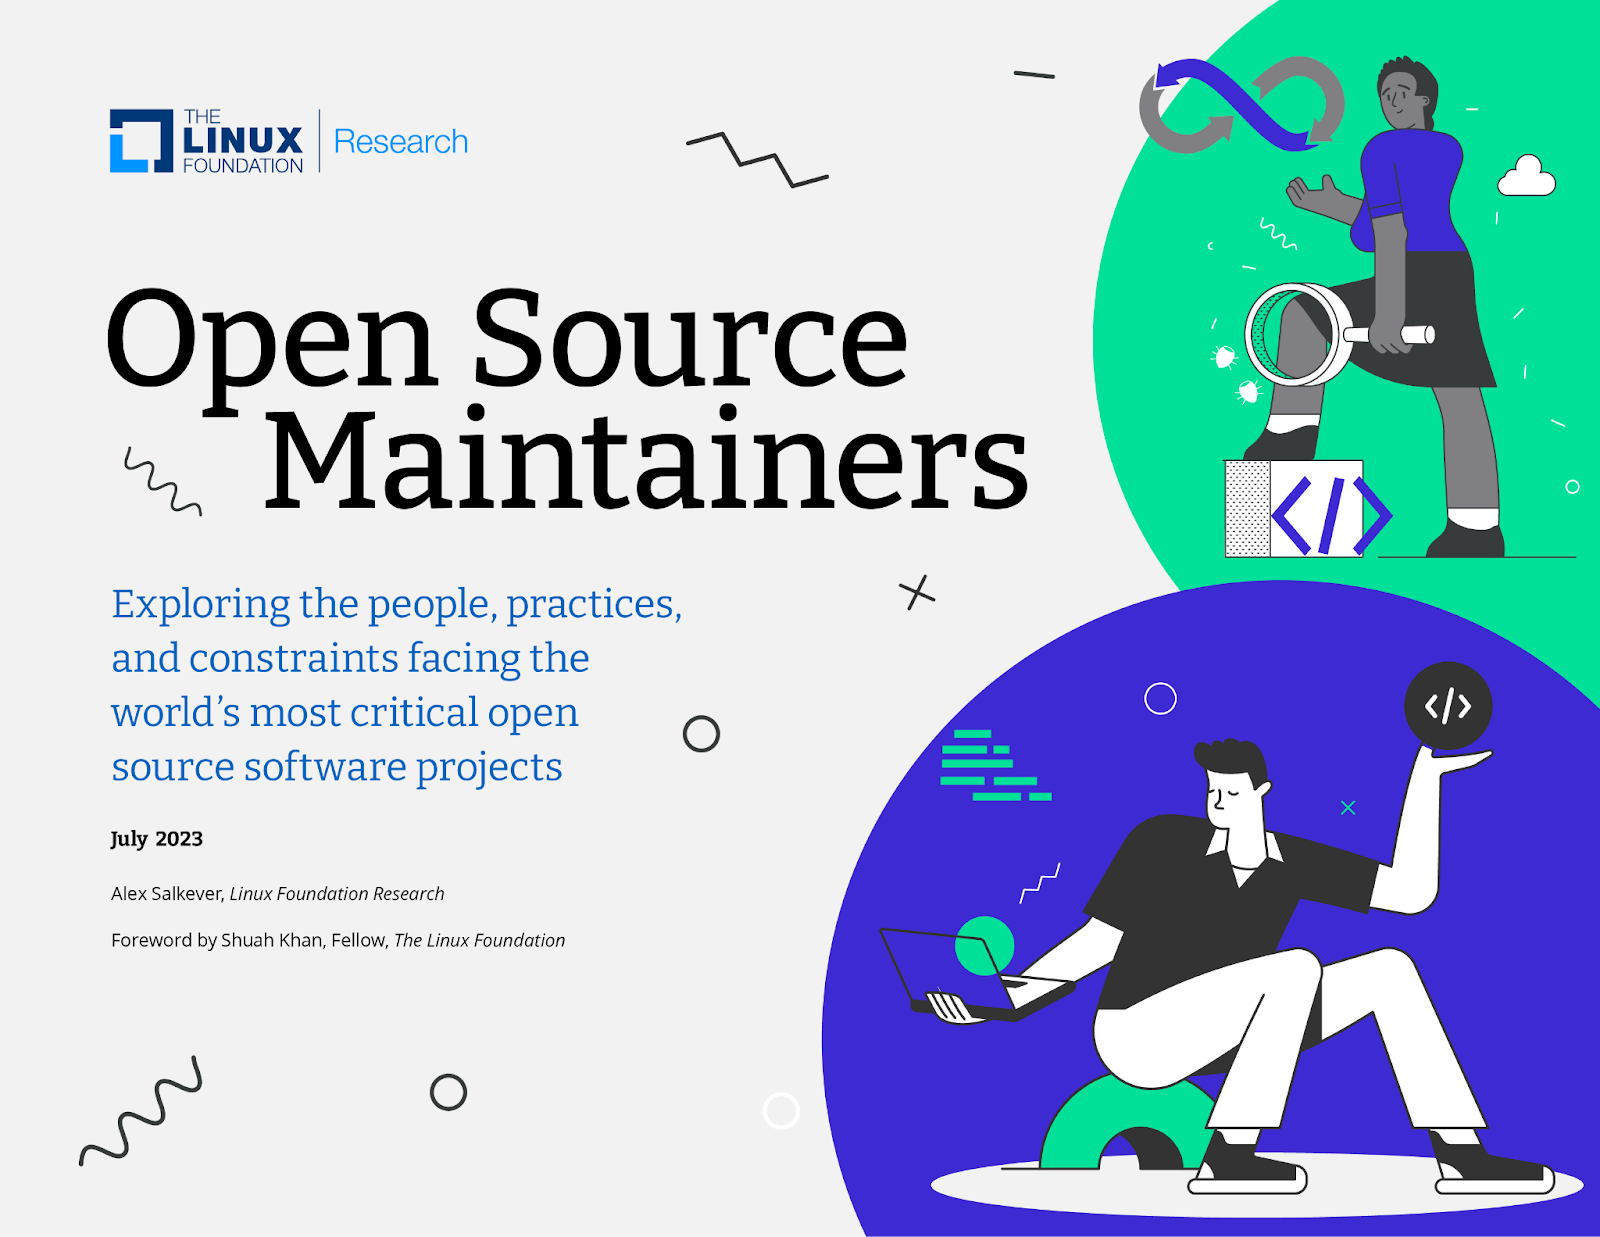 Open Source Maintainers by LF Research